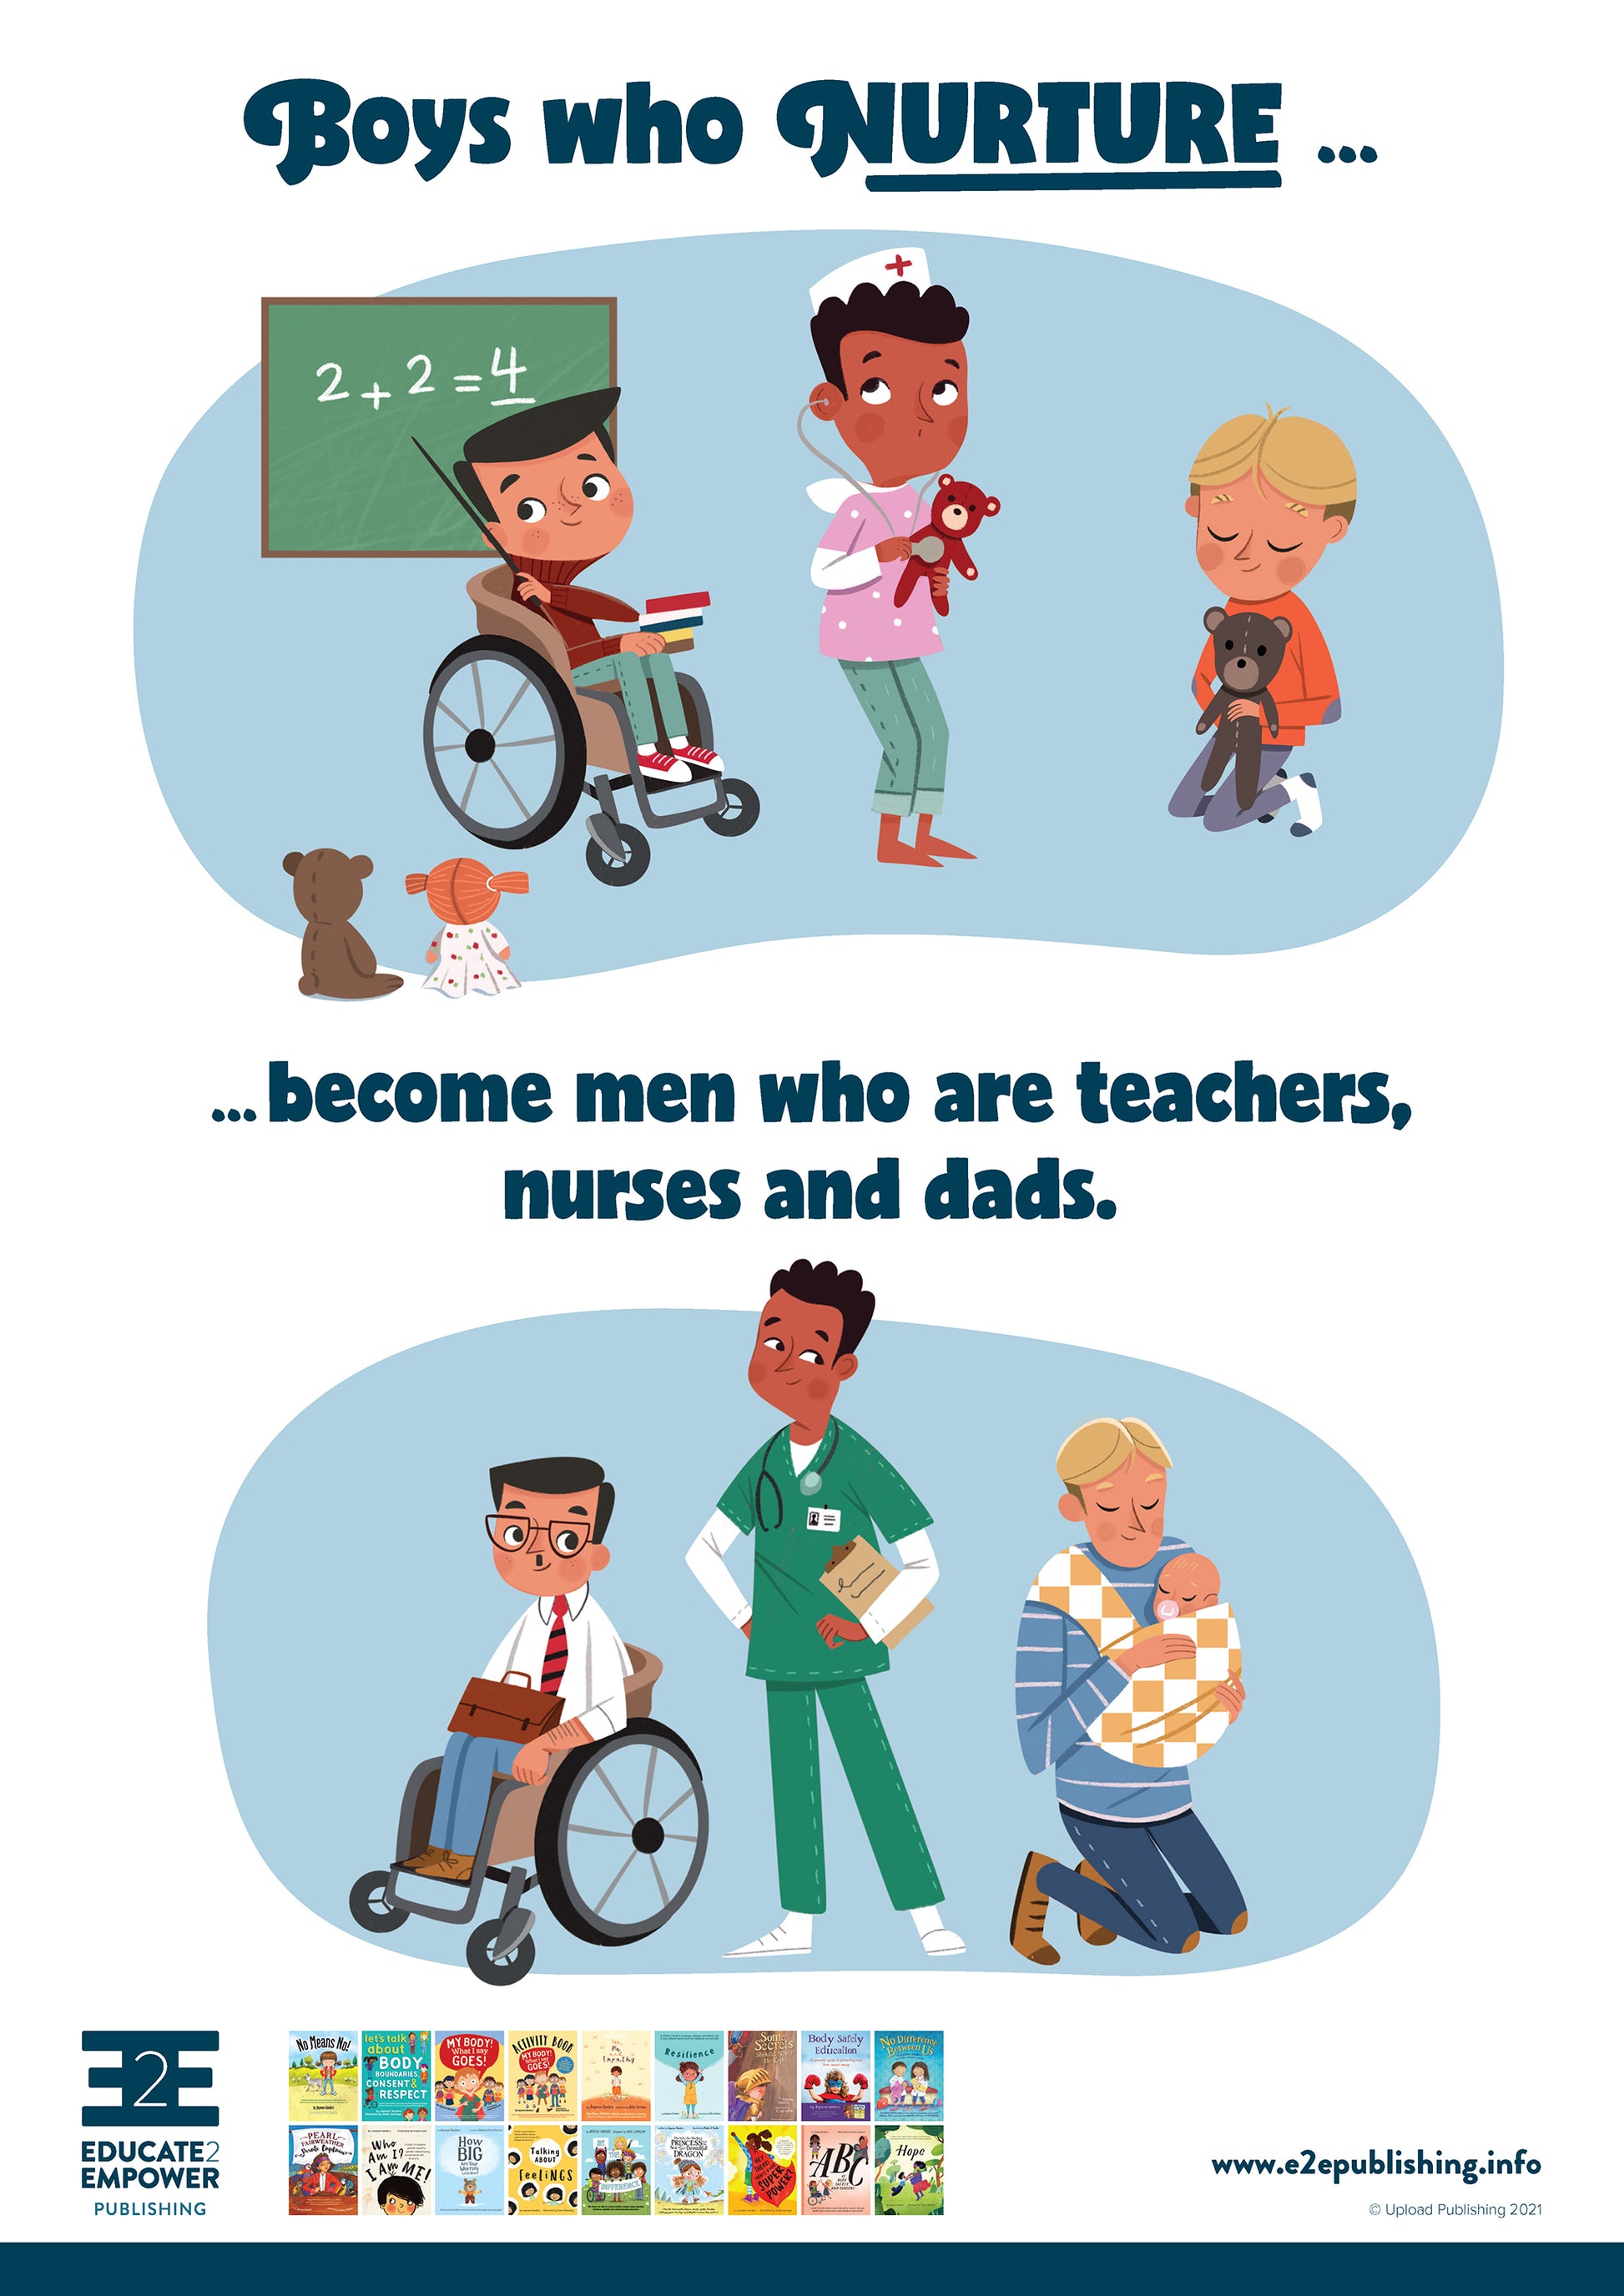 A poster for children titled 'Boys who nurture... become men who are teachers, nurses and dads. This is accompanied by a cartoon image of three young boys caring for teddy bears. Below this the same three boys, as adults, are shown as a teacher, a nurse and a father.